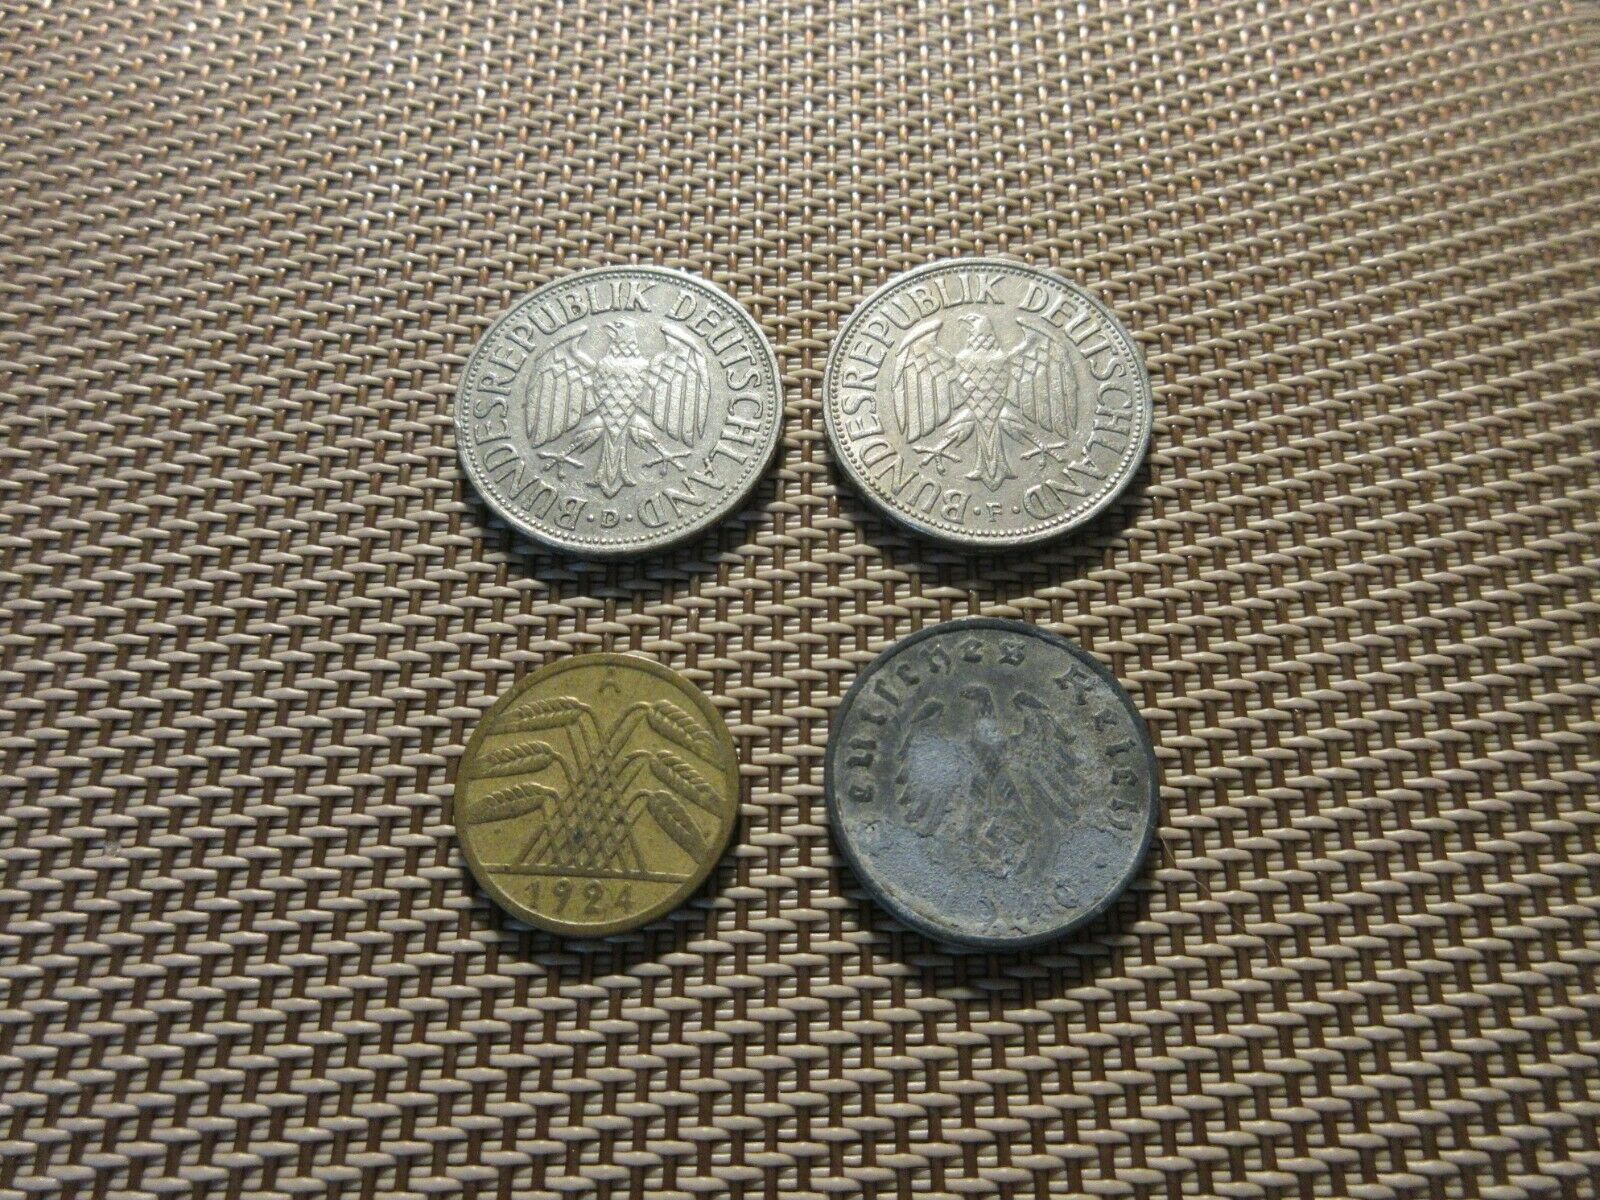 Lot Of 4 Coins From Germany. Some Are Old. German. Foreign Coin Lot.